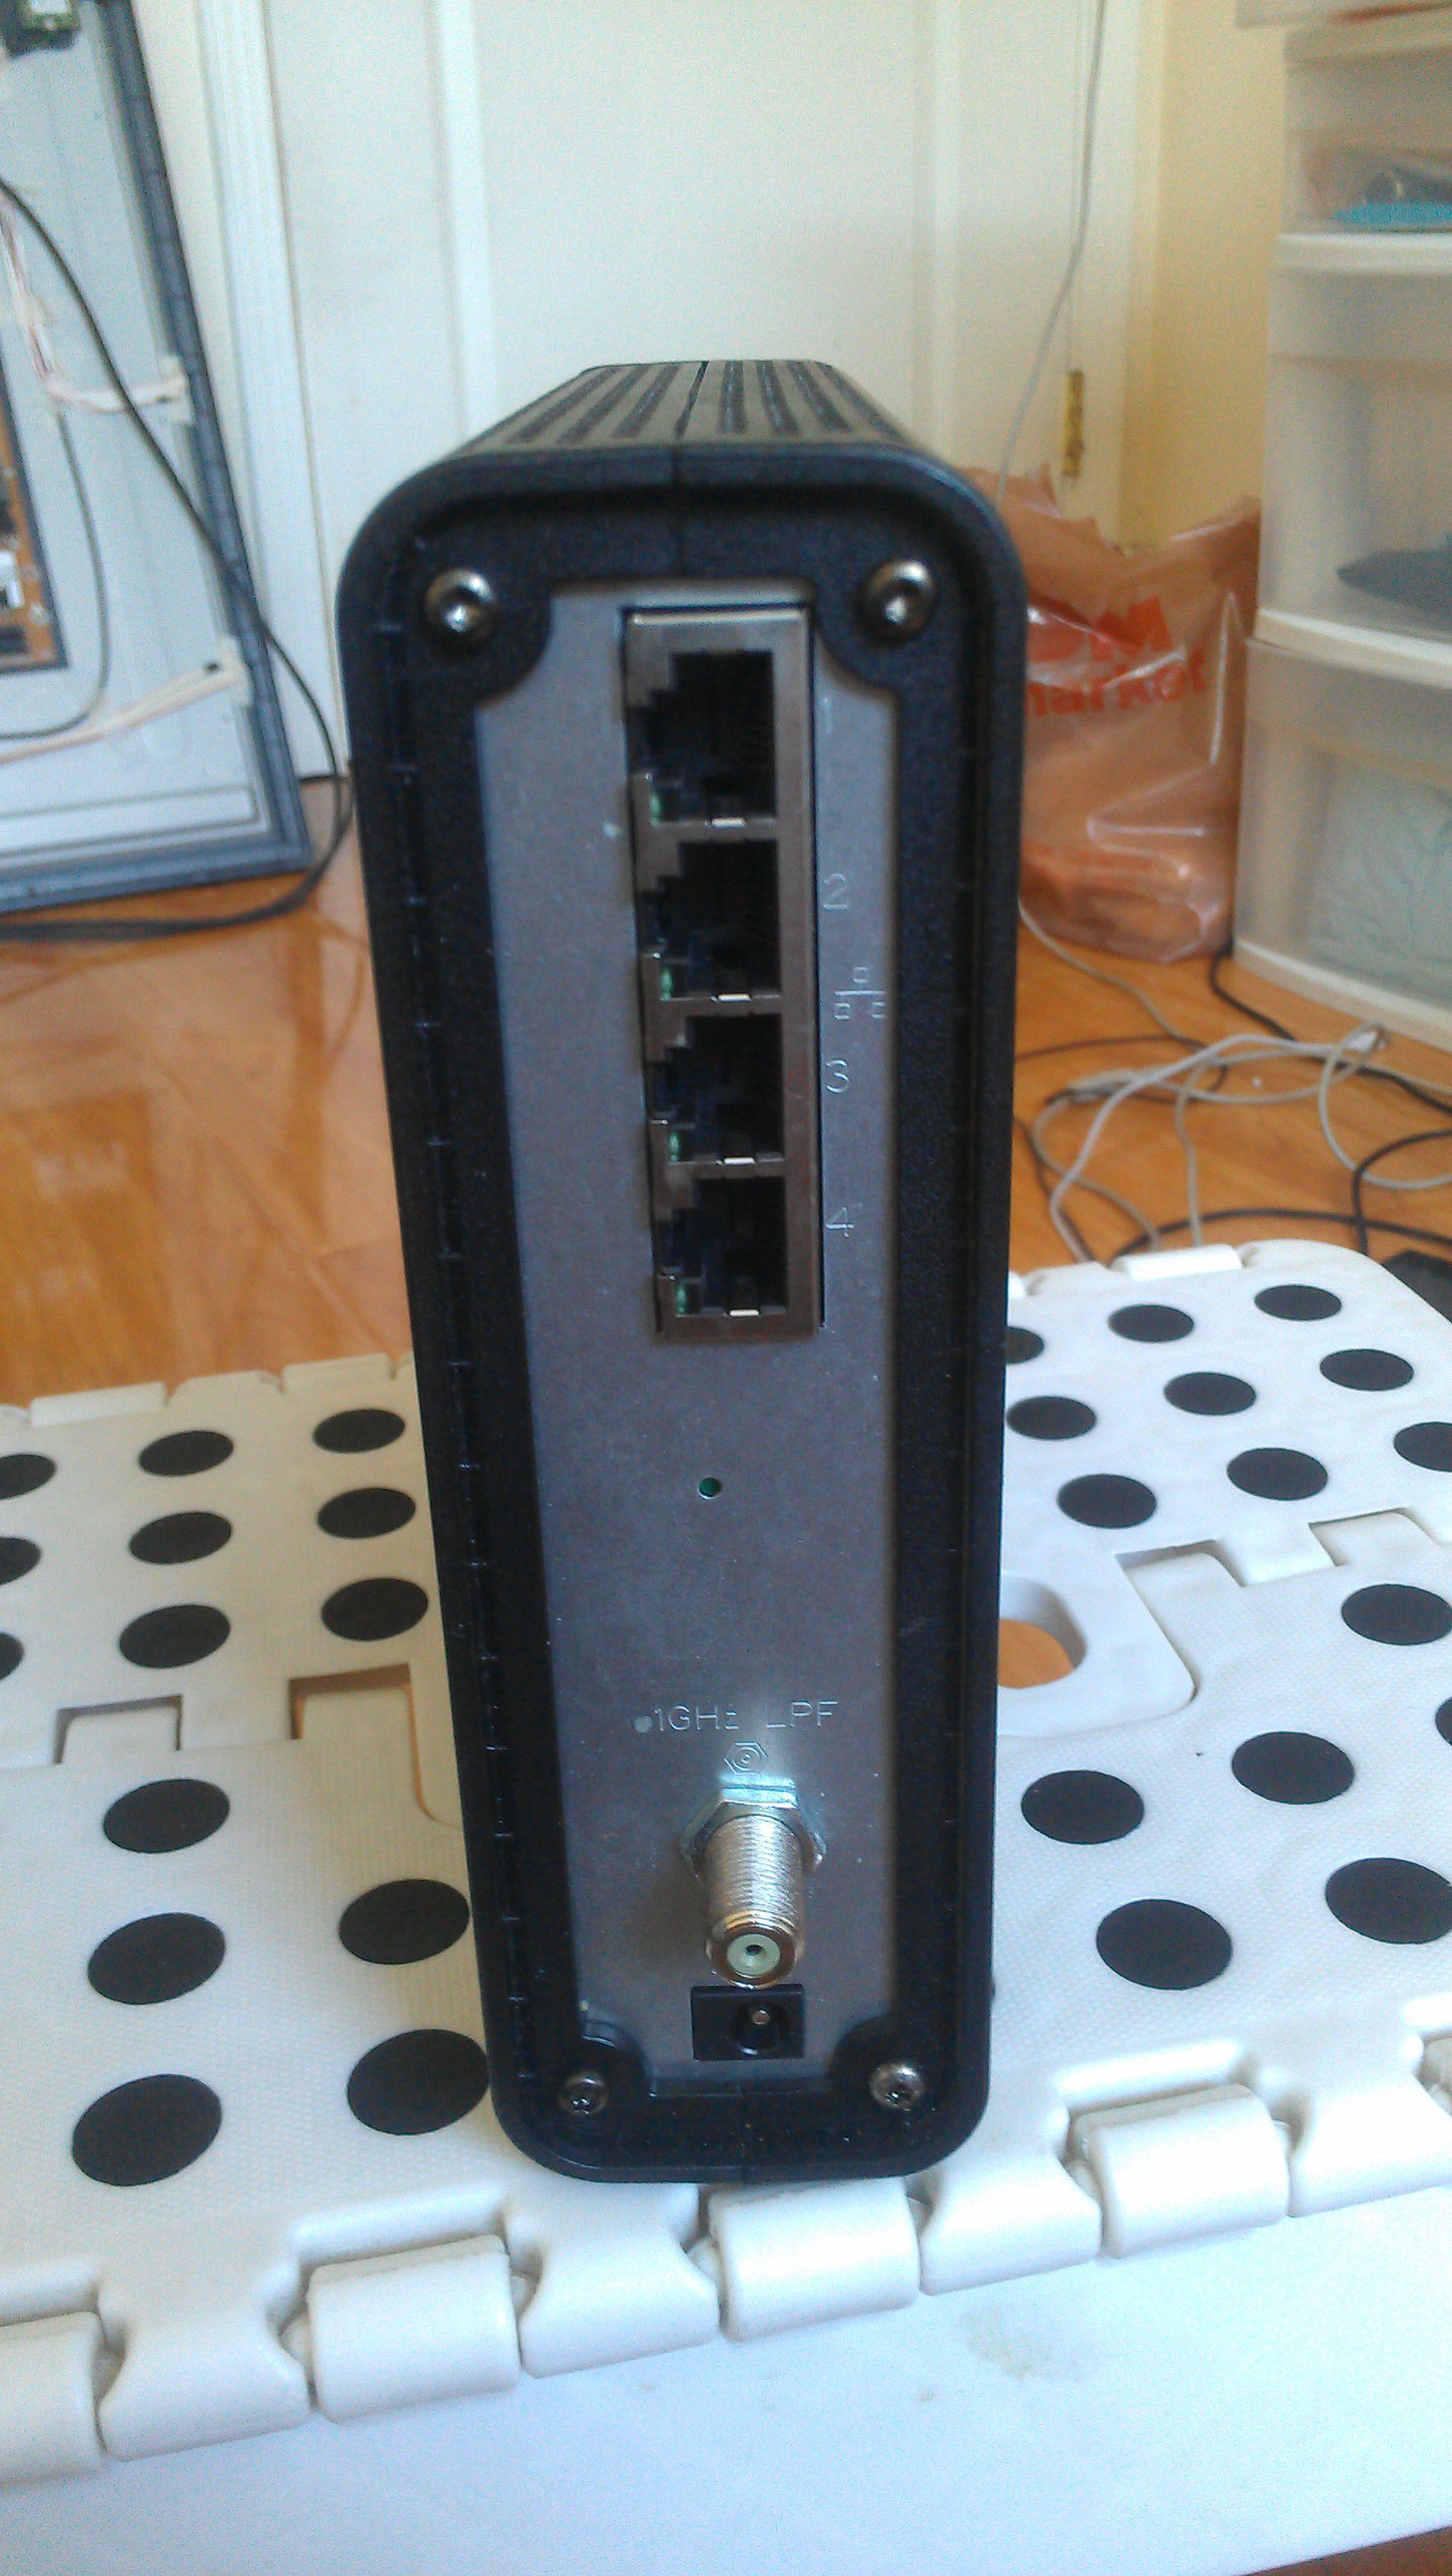 Modem/router two in one